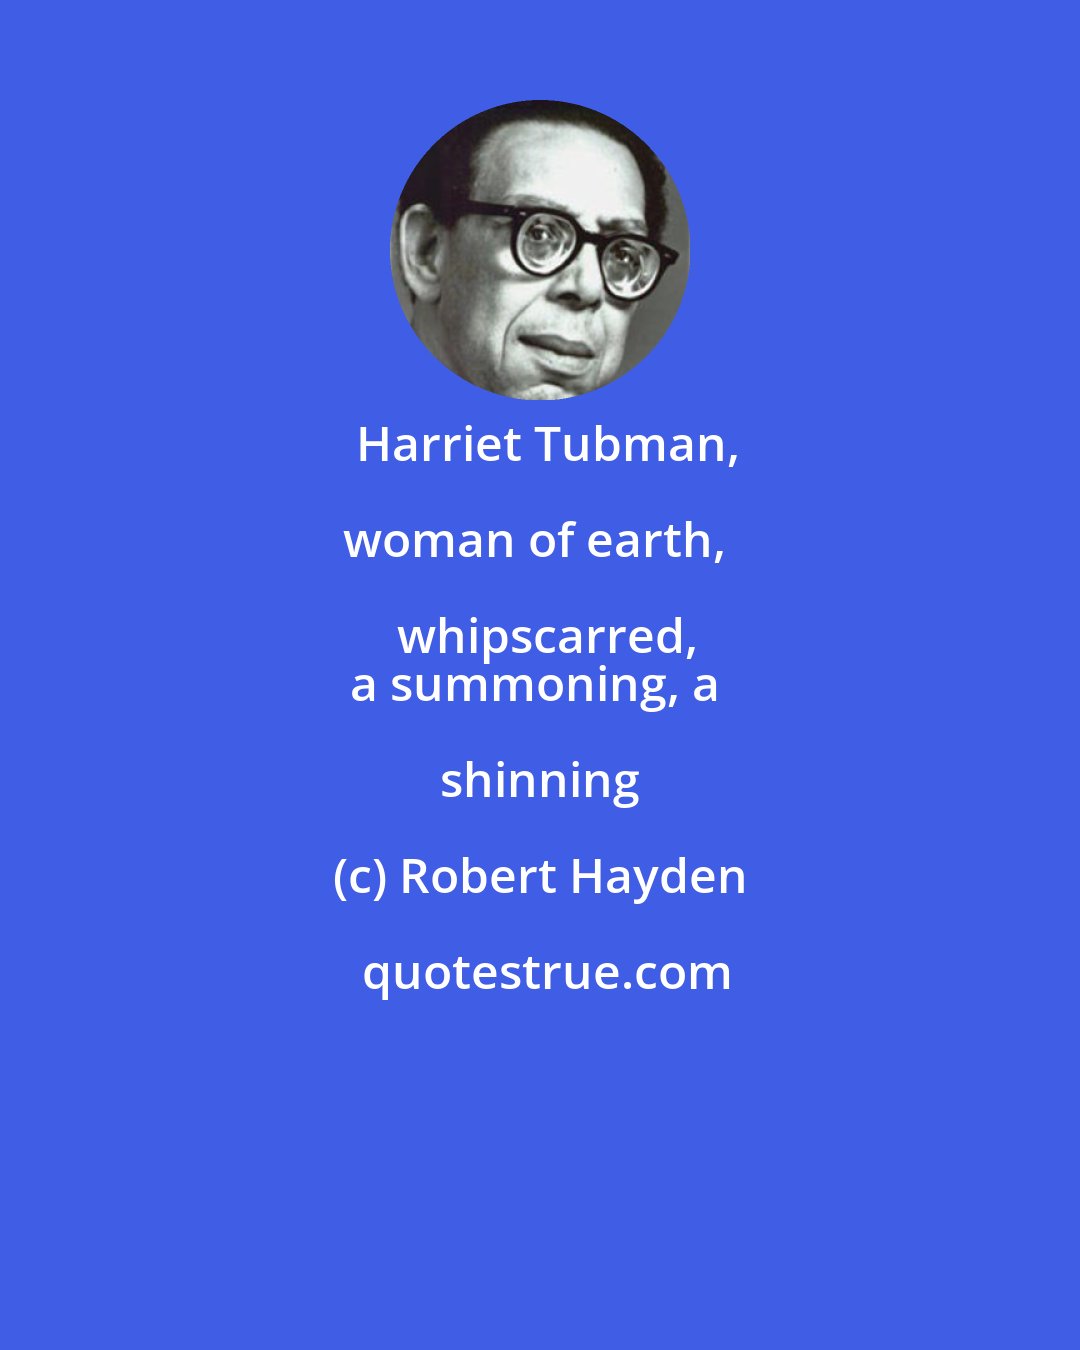 Robert Hayden: Harriet Tubman,

woman of earth, whipscarred,
a summoning, a shinning